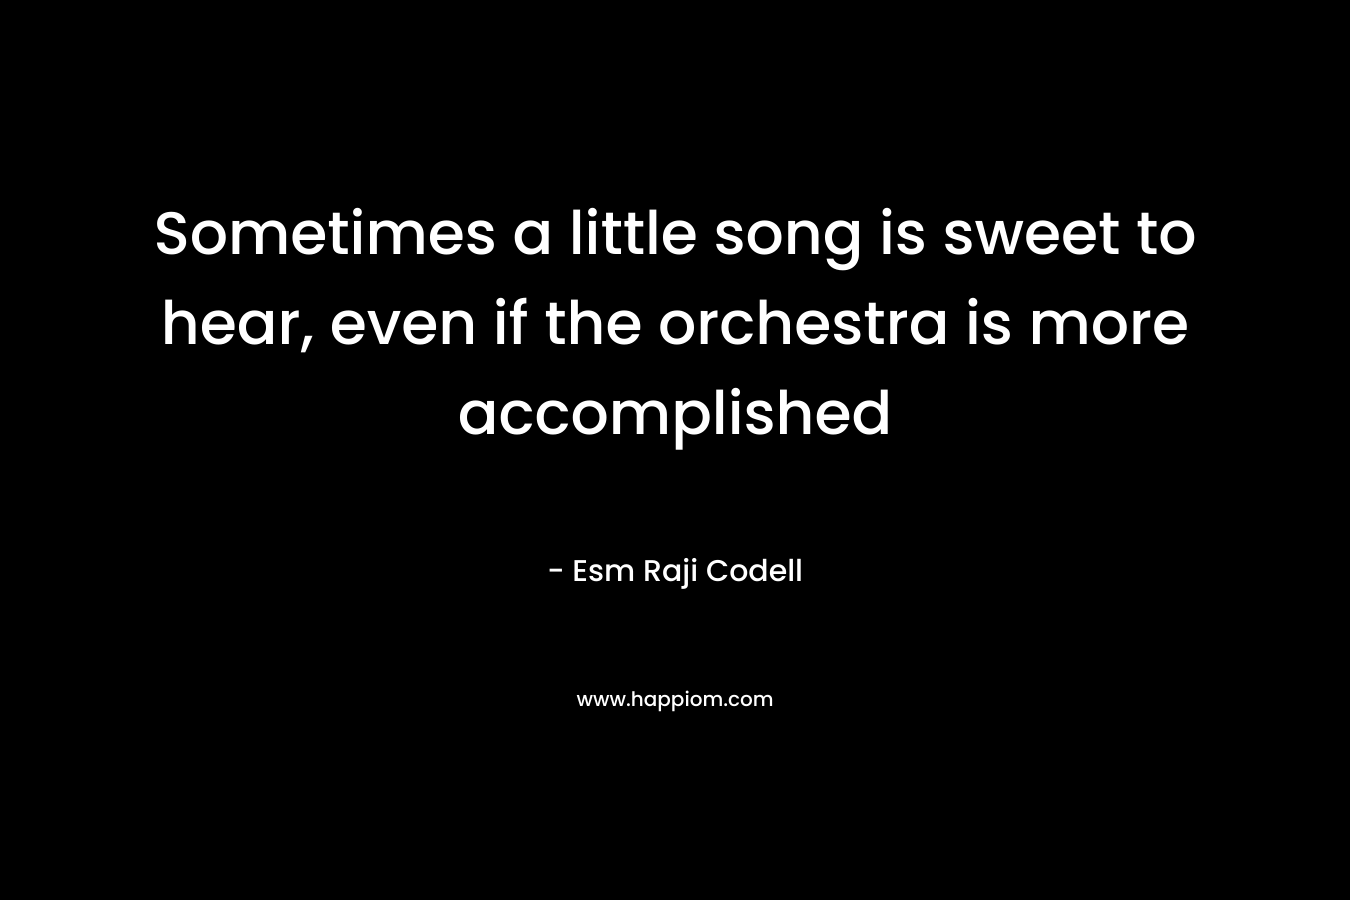 Sometimes a little song is sweet to hear, even if the orchestra is more accomplished